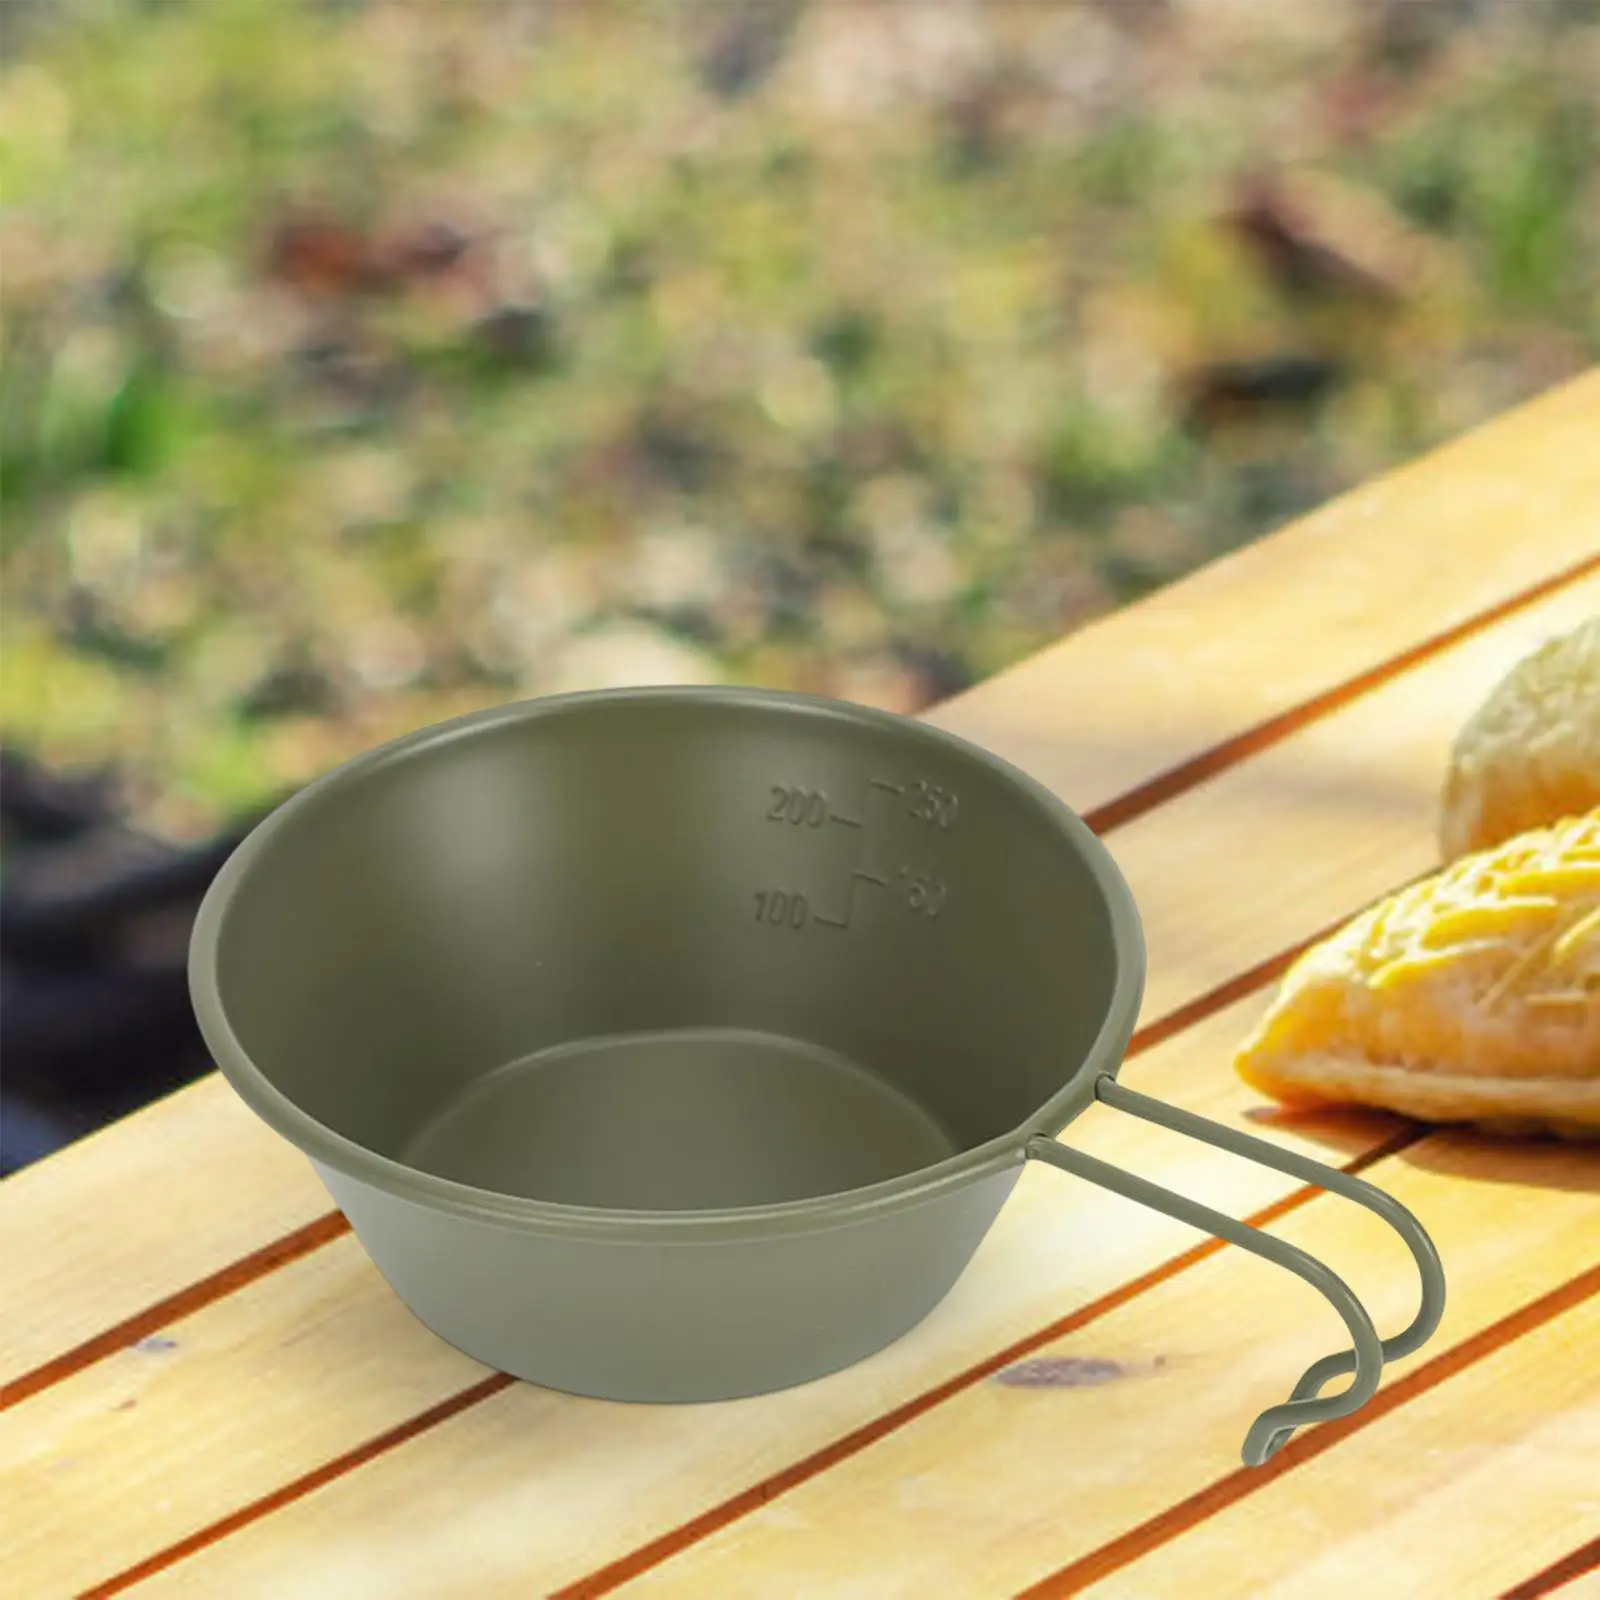 Stainless Steel Camping Bowl Outdoor Dinnerware Portable for Kitchen Picnic